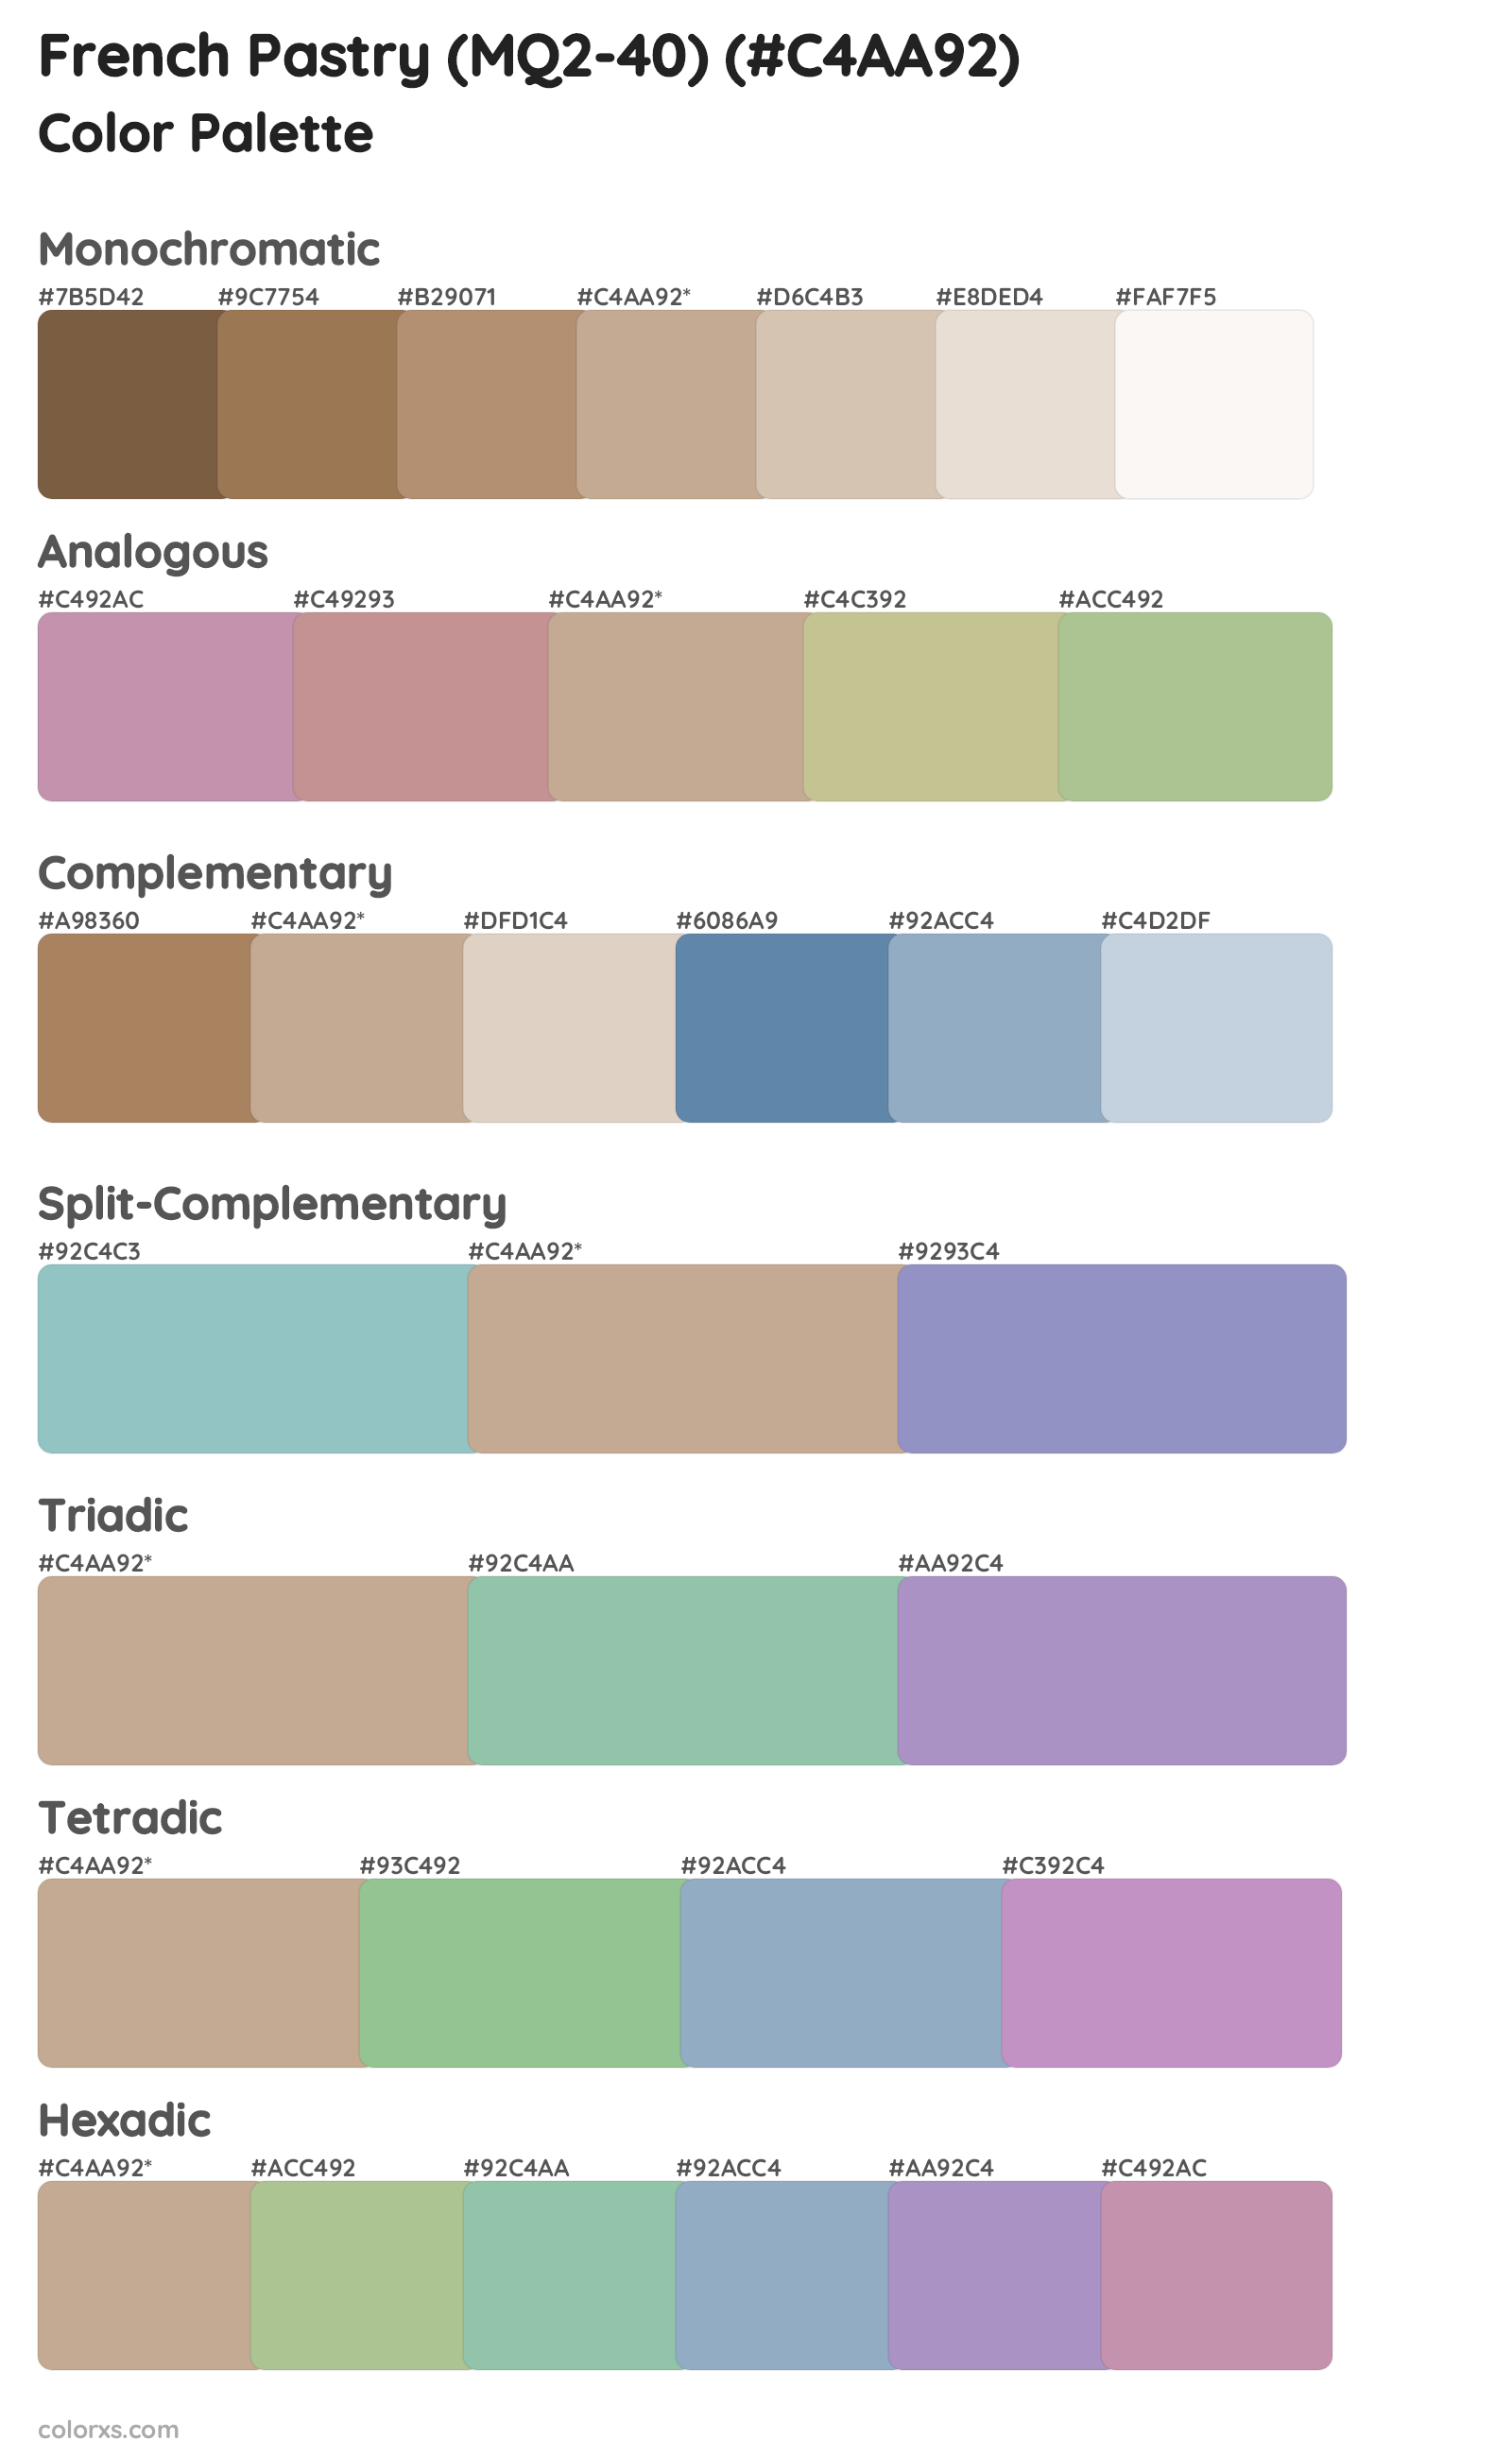 French Pastry (MQ2-40) Color Scheme Palettes